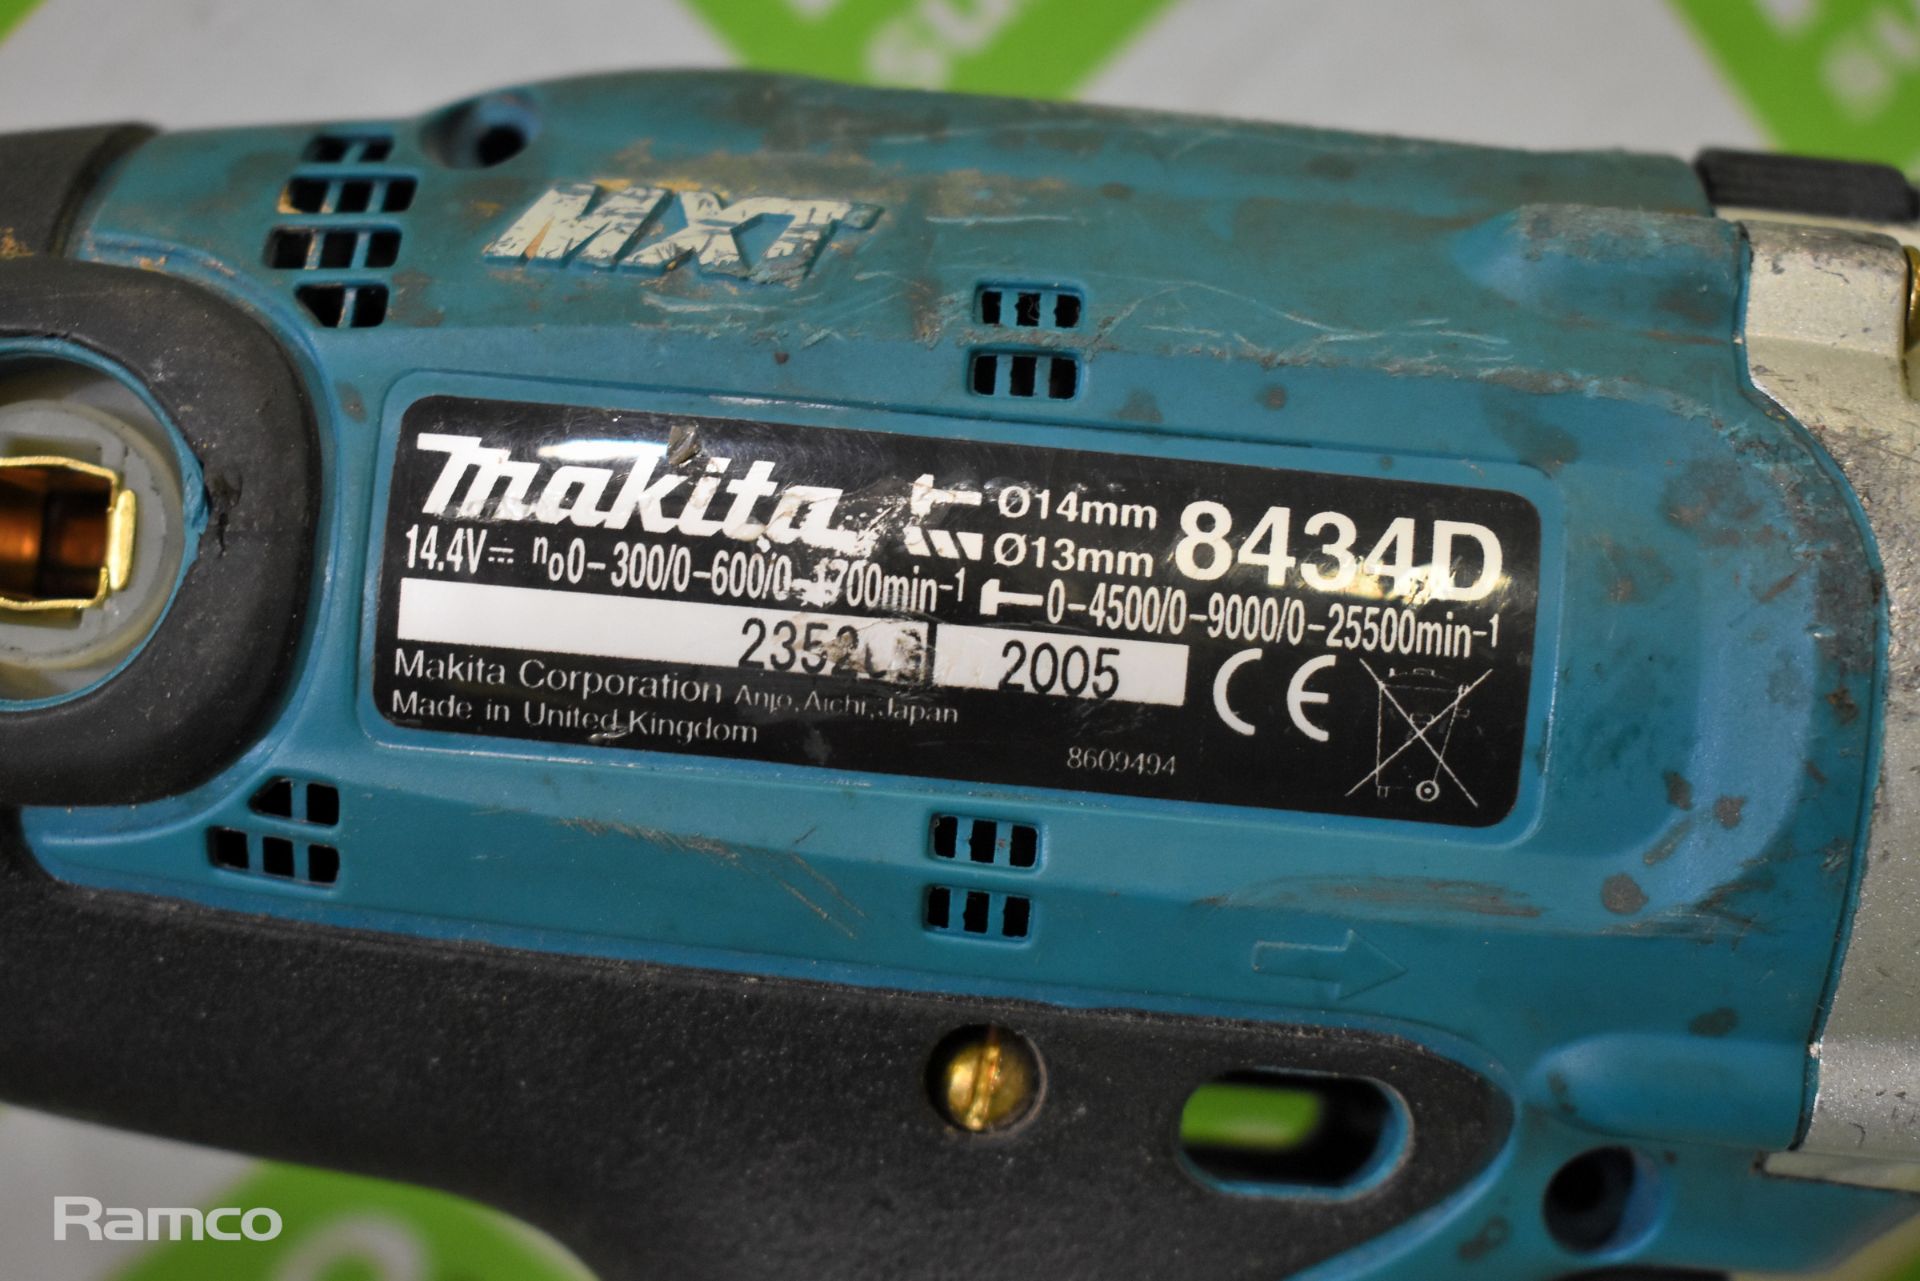 Makita 8434D 14.4V portable electric drill in plastic carry care - SPARES OR REPAIRS - NO BATTERY - Image 7 of 11